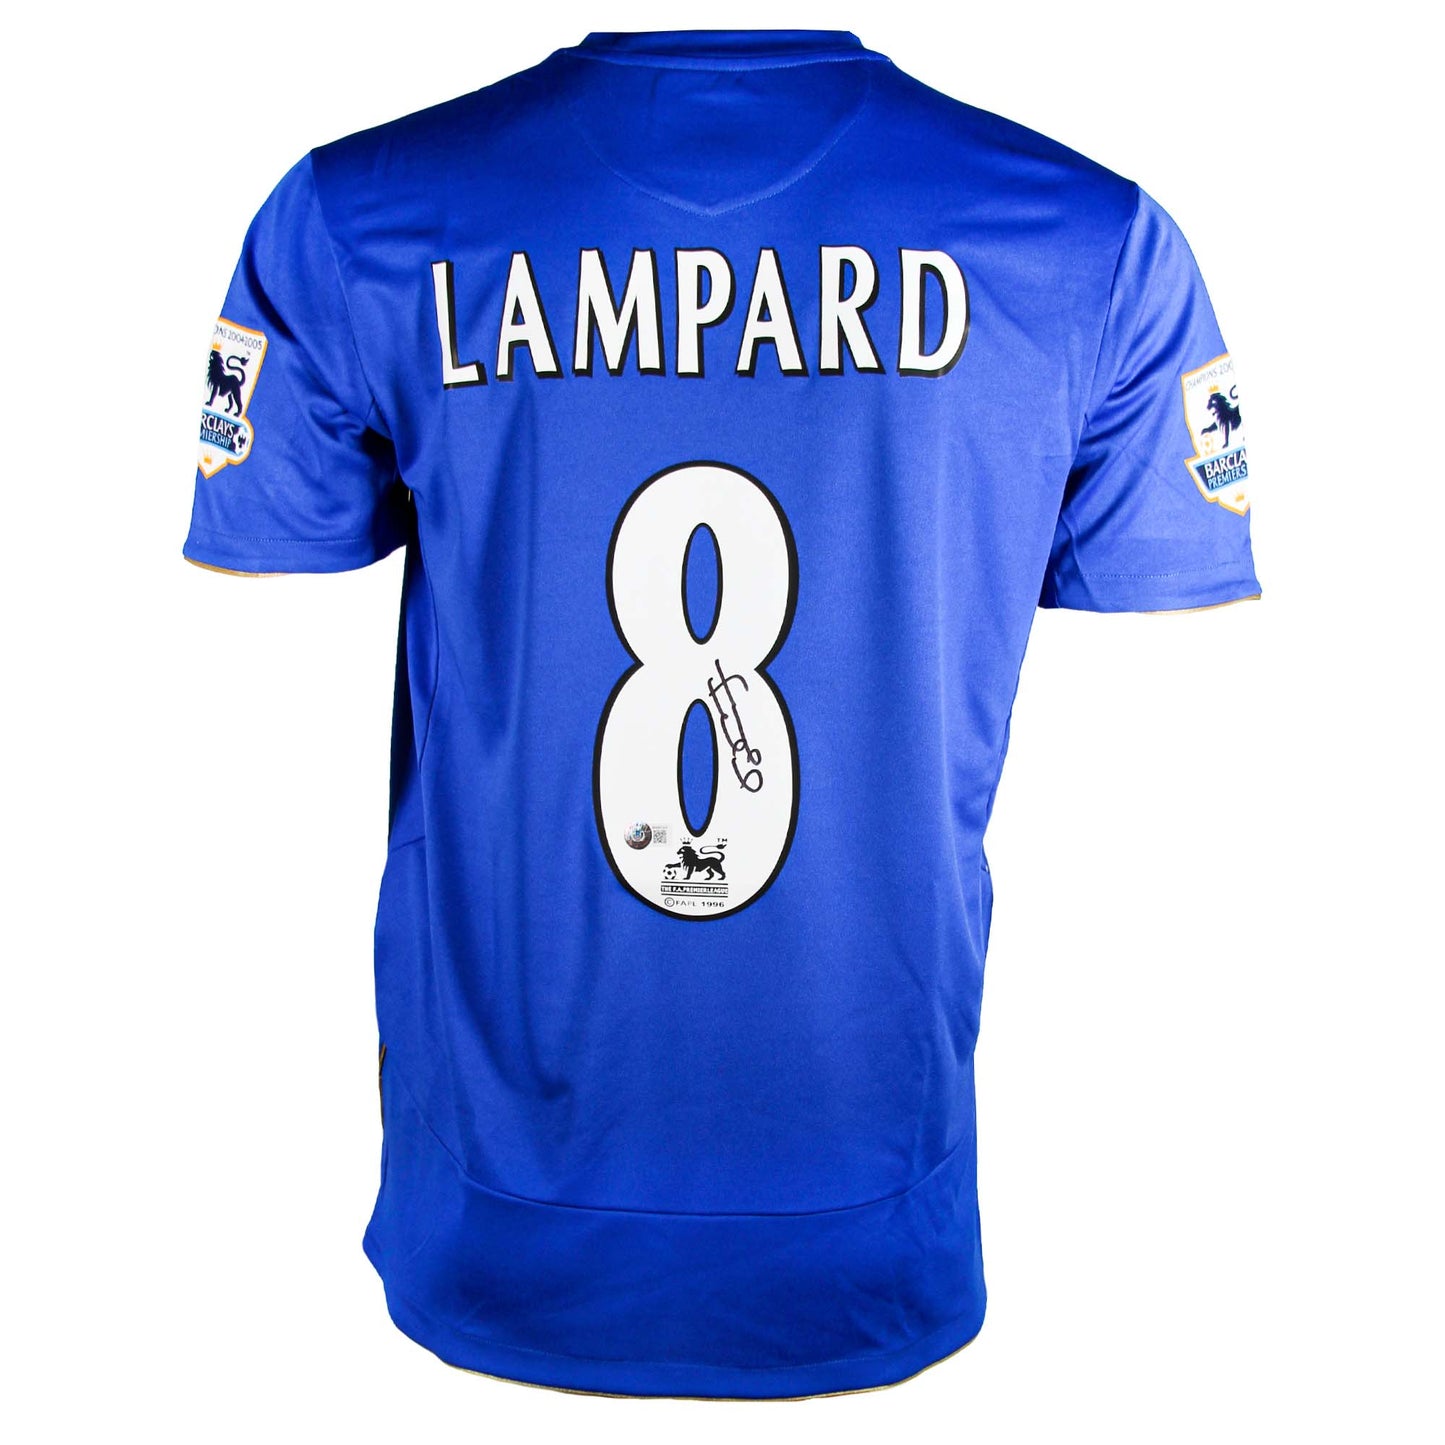 Frank Lampard Signed Chelsea Jersey